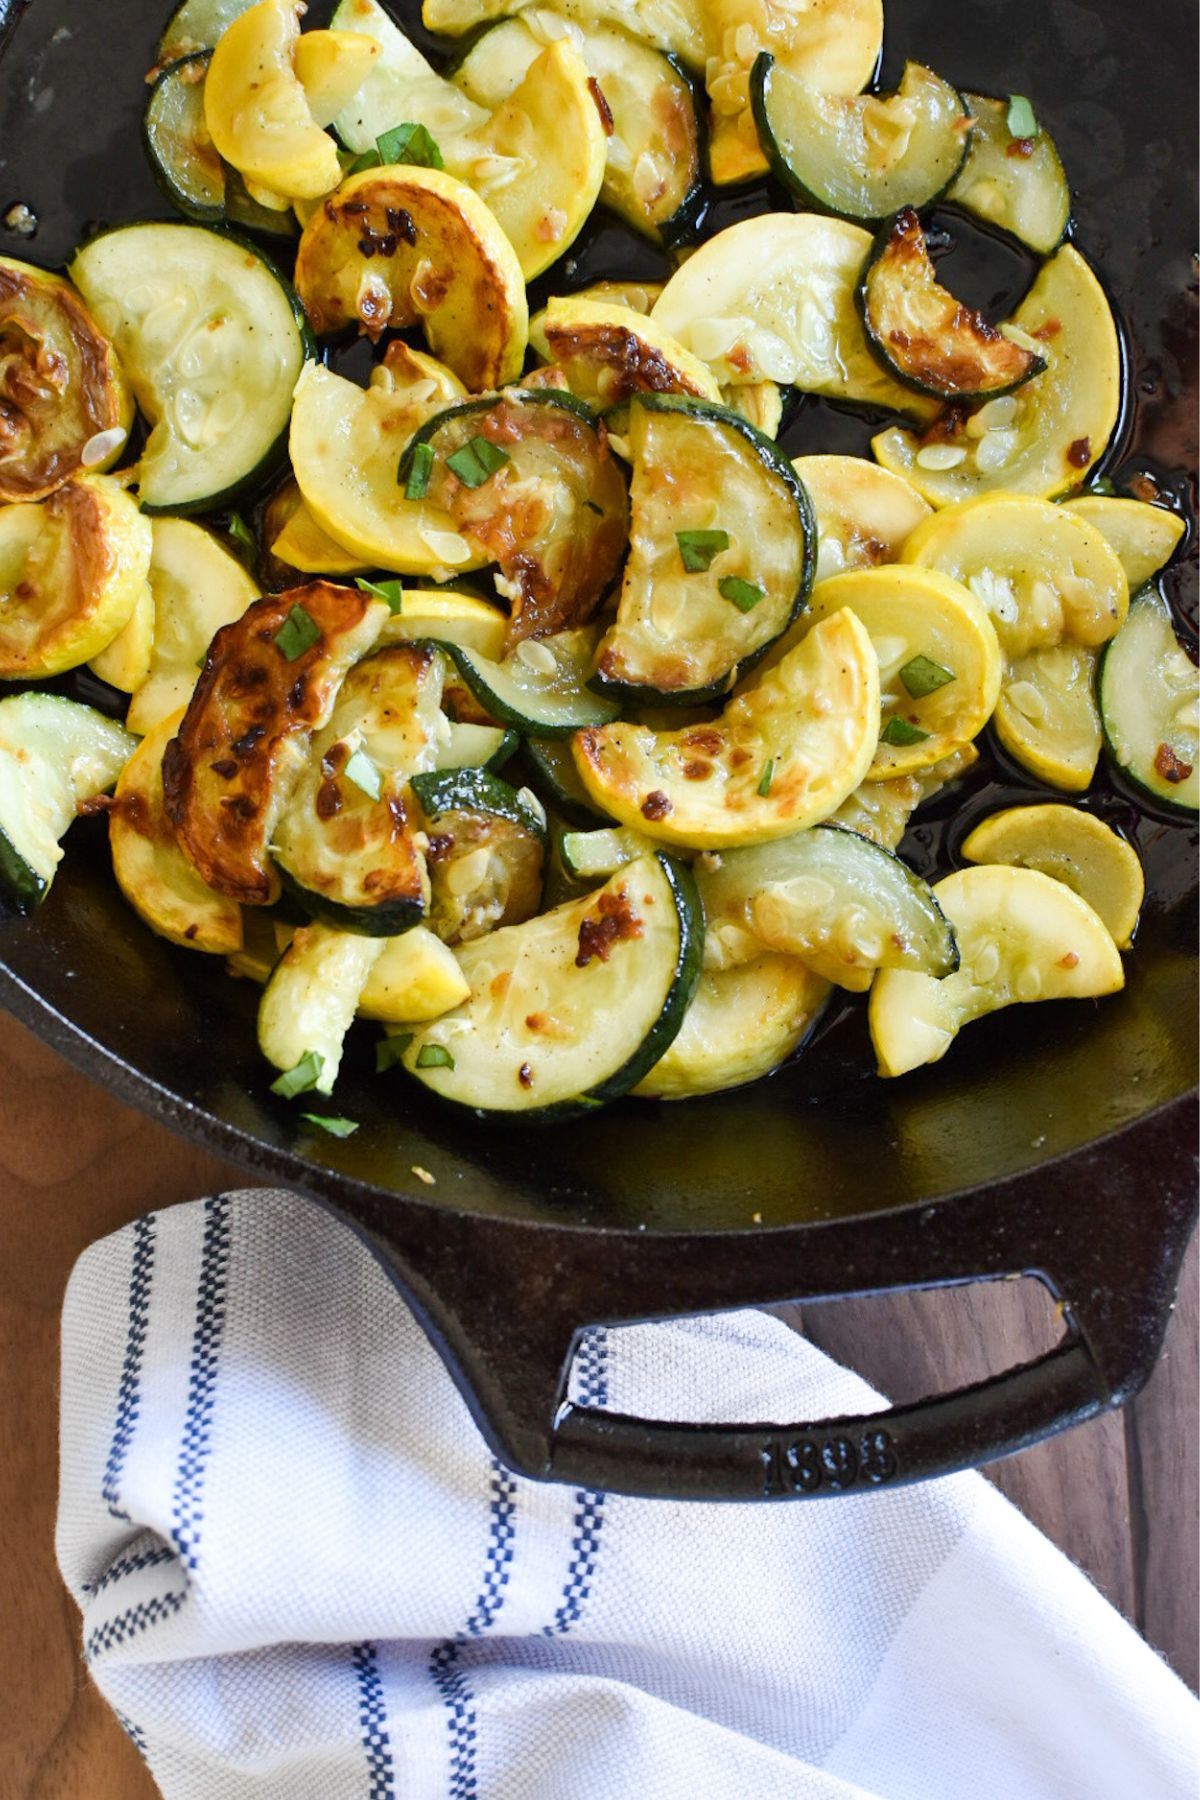 Sautéed zucchini and yellow squash in a cast iron pan with towel below it.